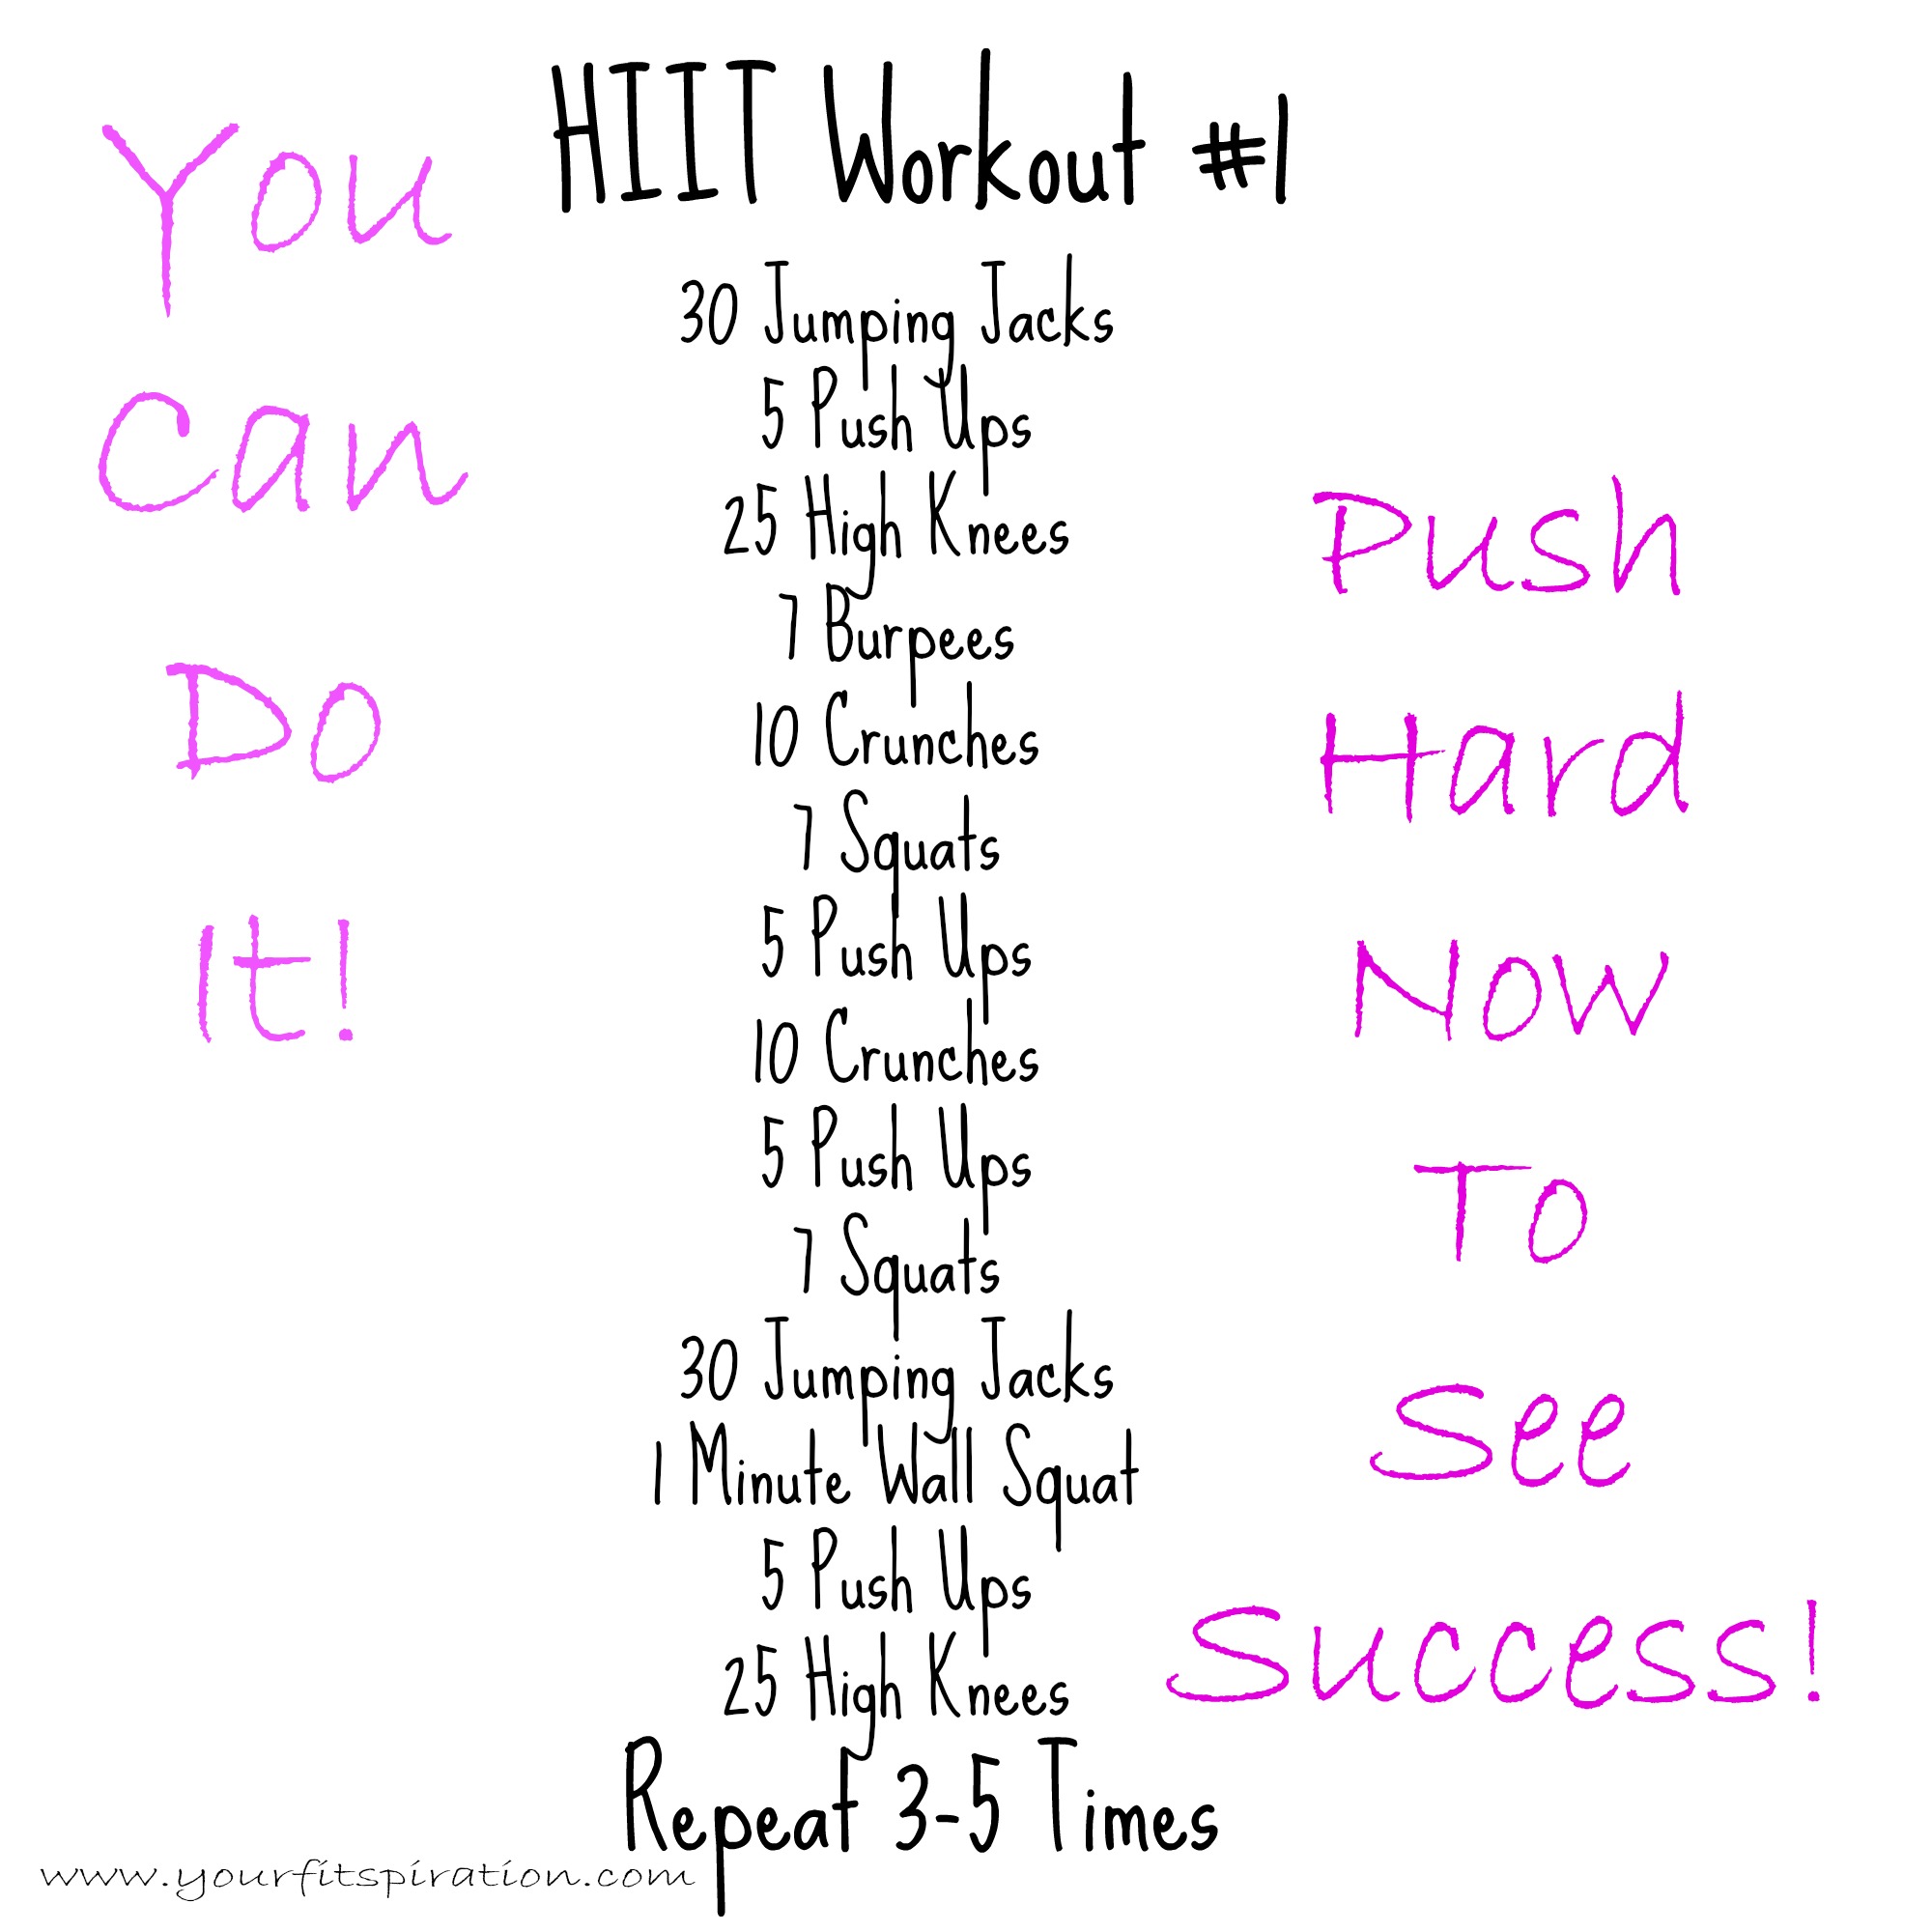 20 HIIT Weight Loss Workouts That Will Shrink Belly Fat